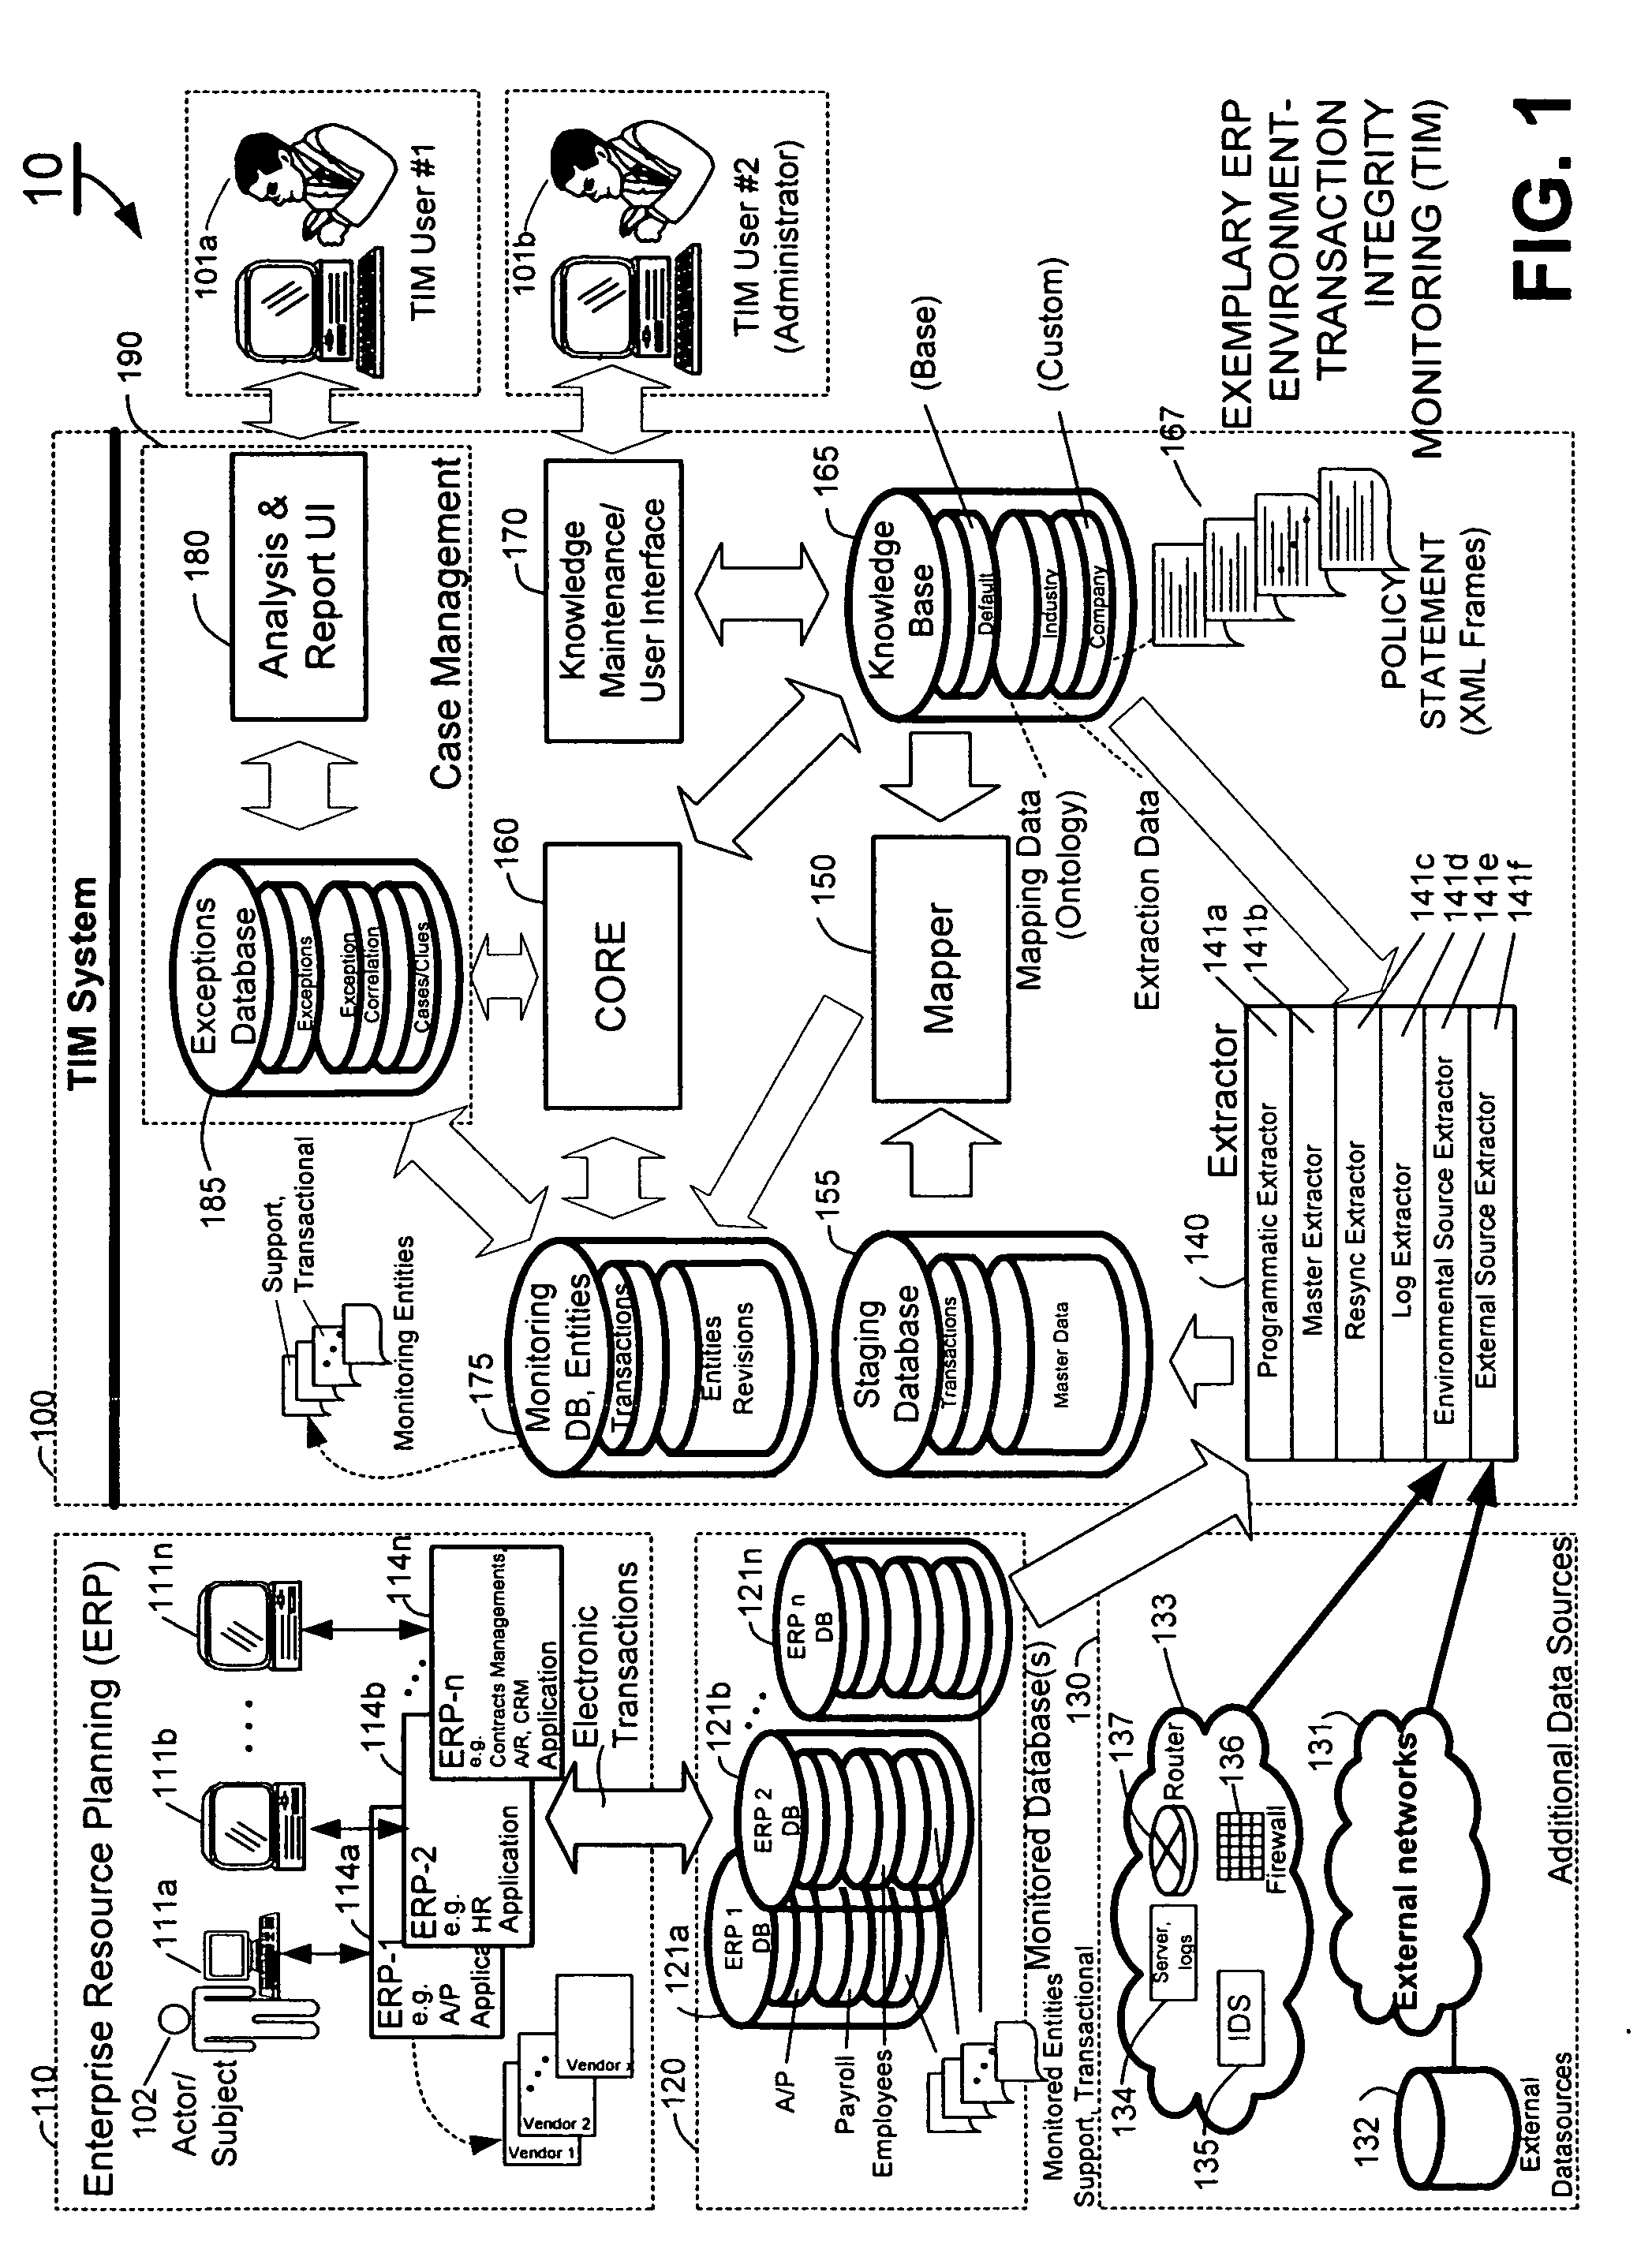 Methods and systems for transaction compliance monitoring